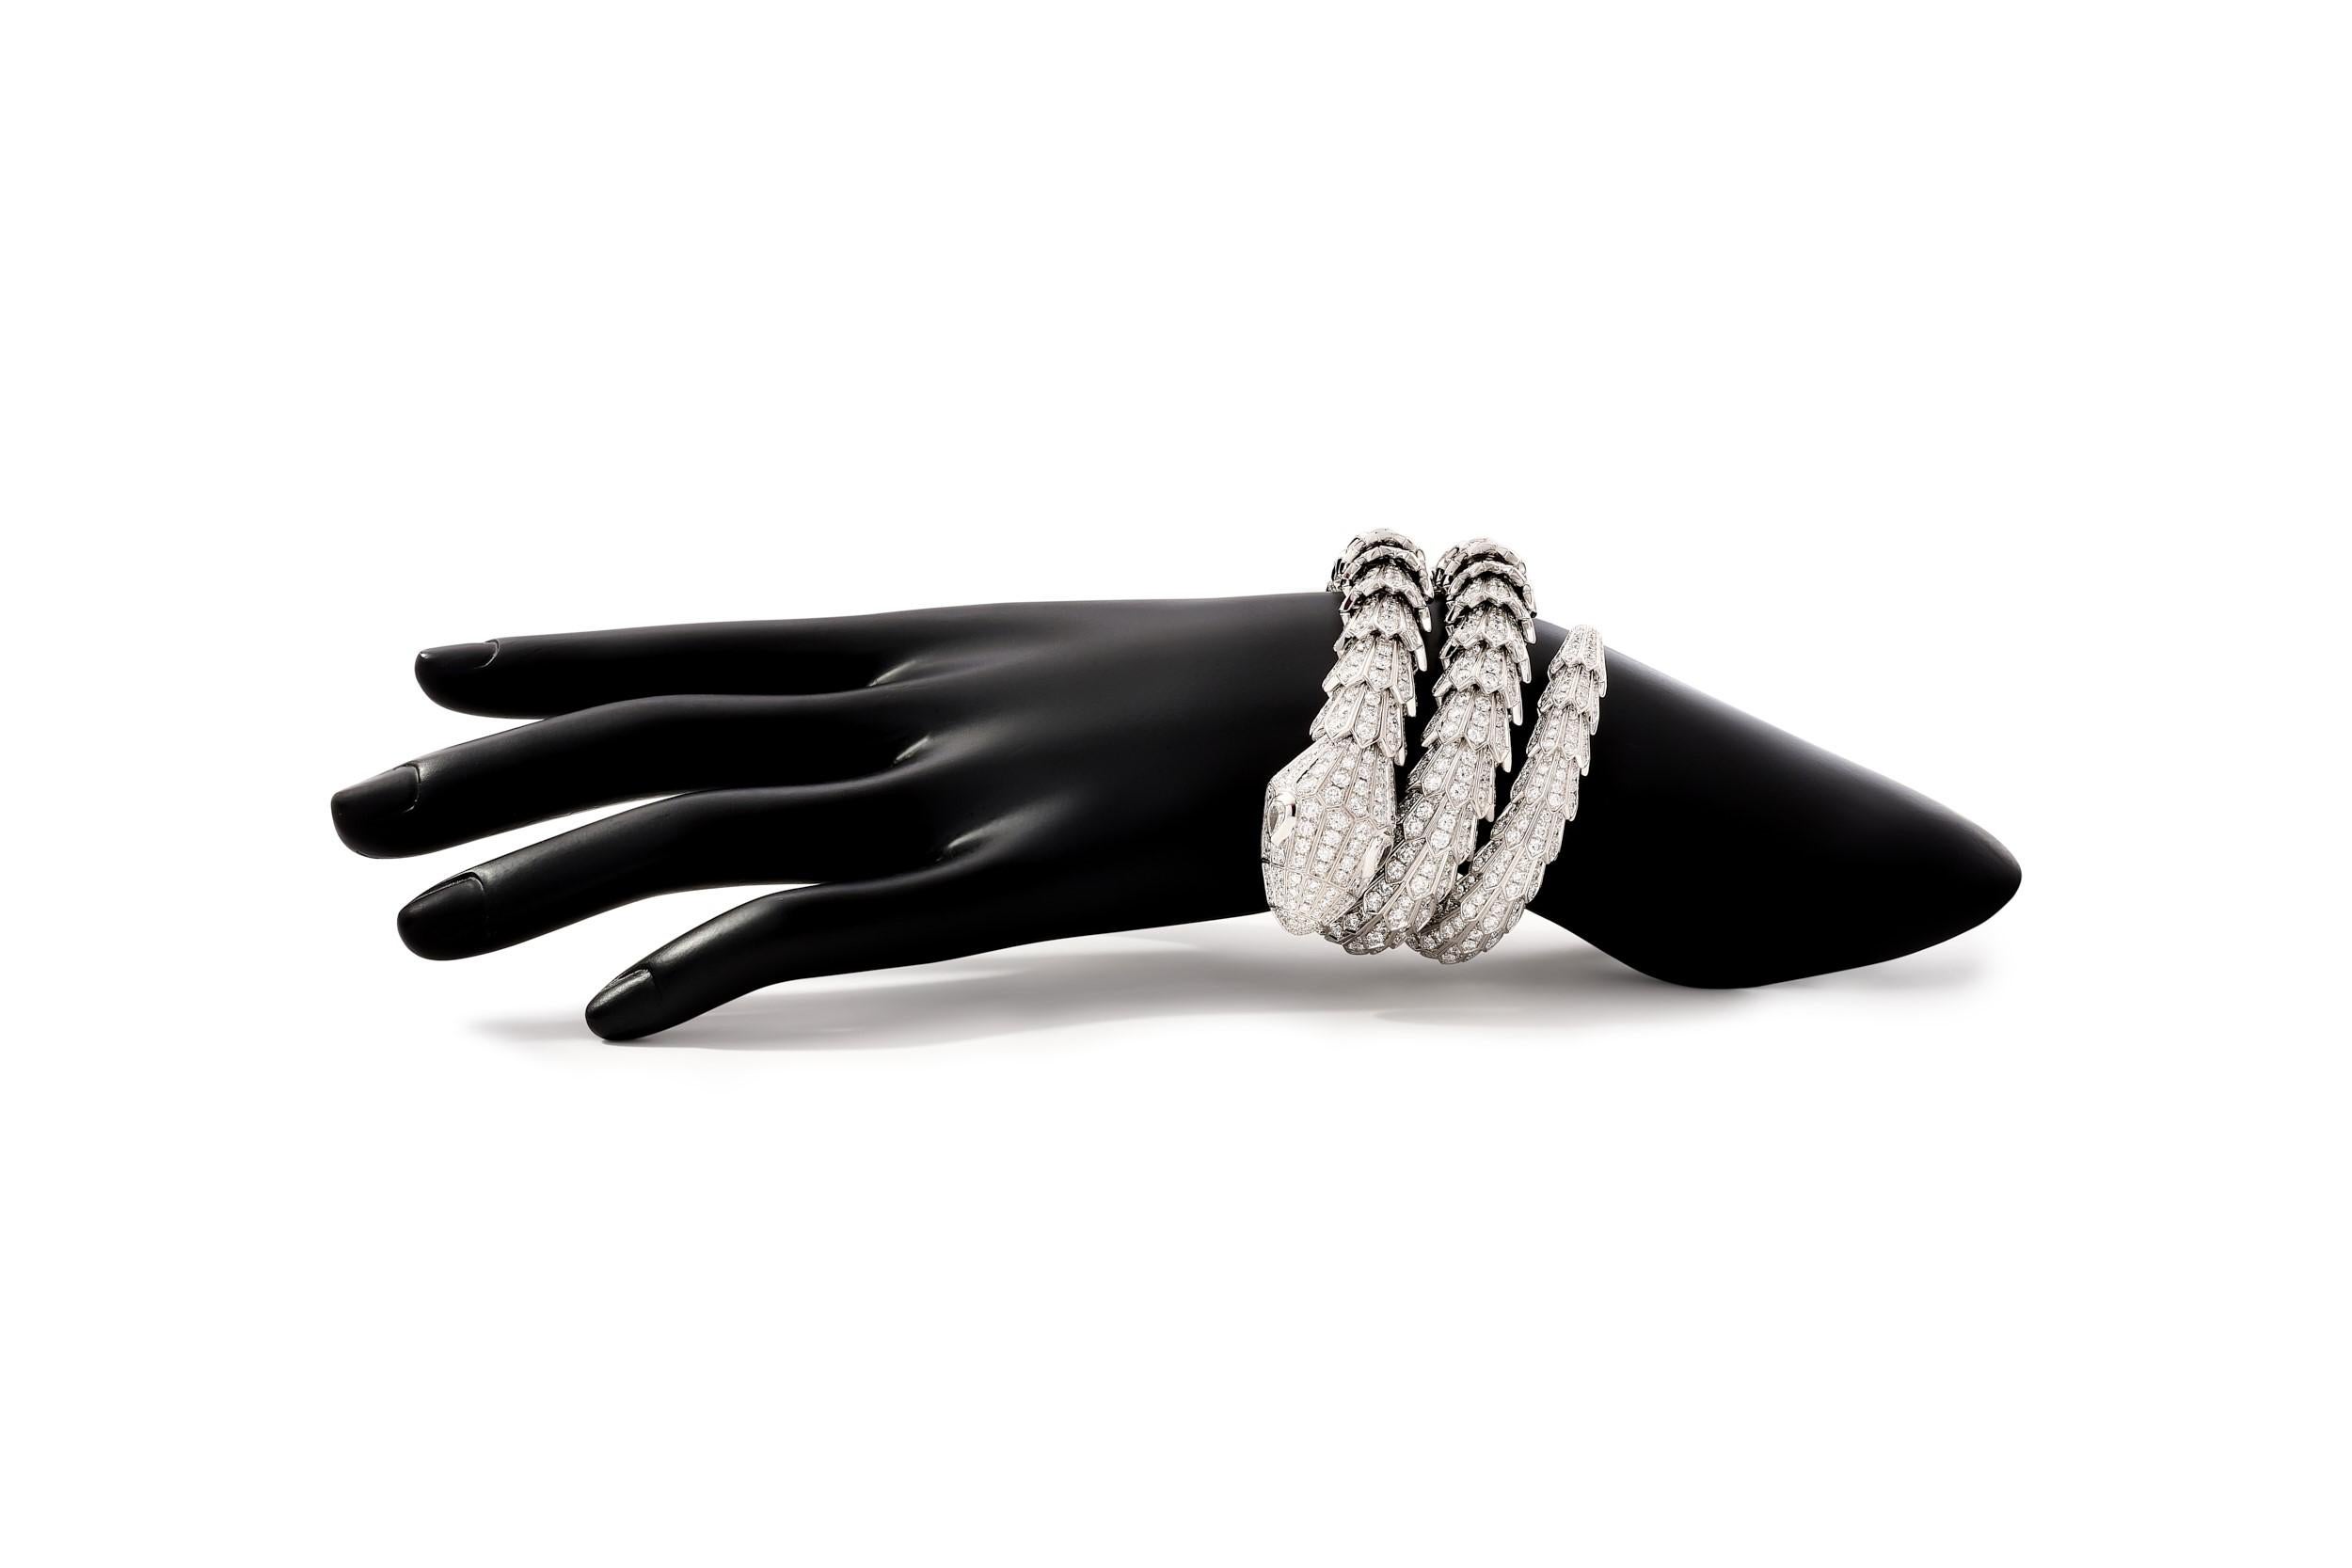 Bulgari Serpenti diamond snake bracelet in 18k white gold, accompanied by Bulgari box.

This prominent Bulgari Serpenti piece features approximately 49.56 carats of round brilliant cut diamonds pave set over the entirety of the bracelet, as well as